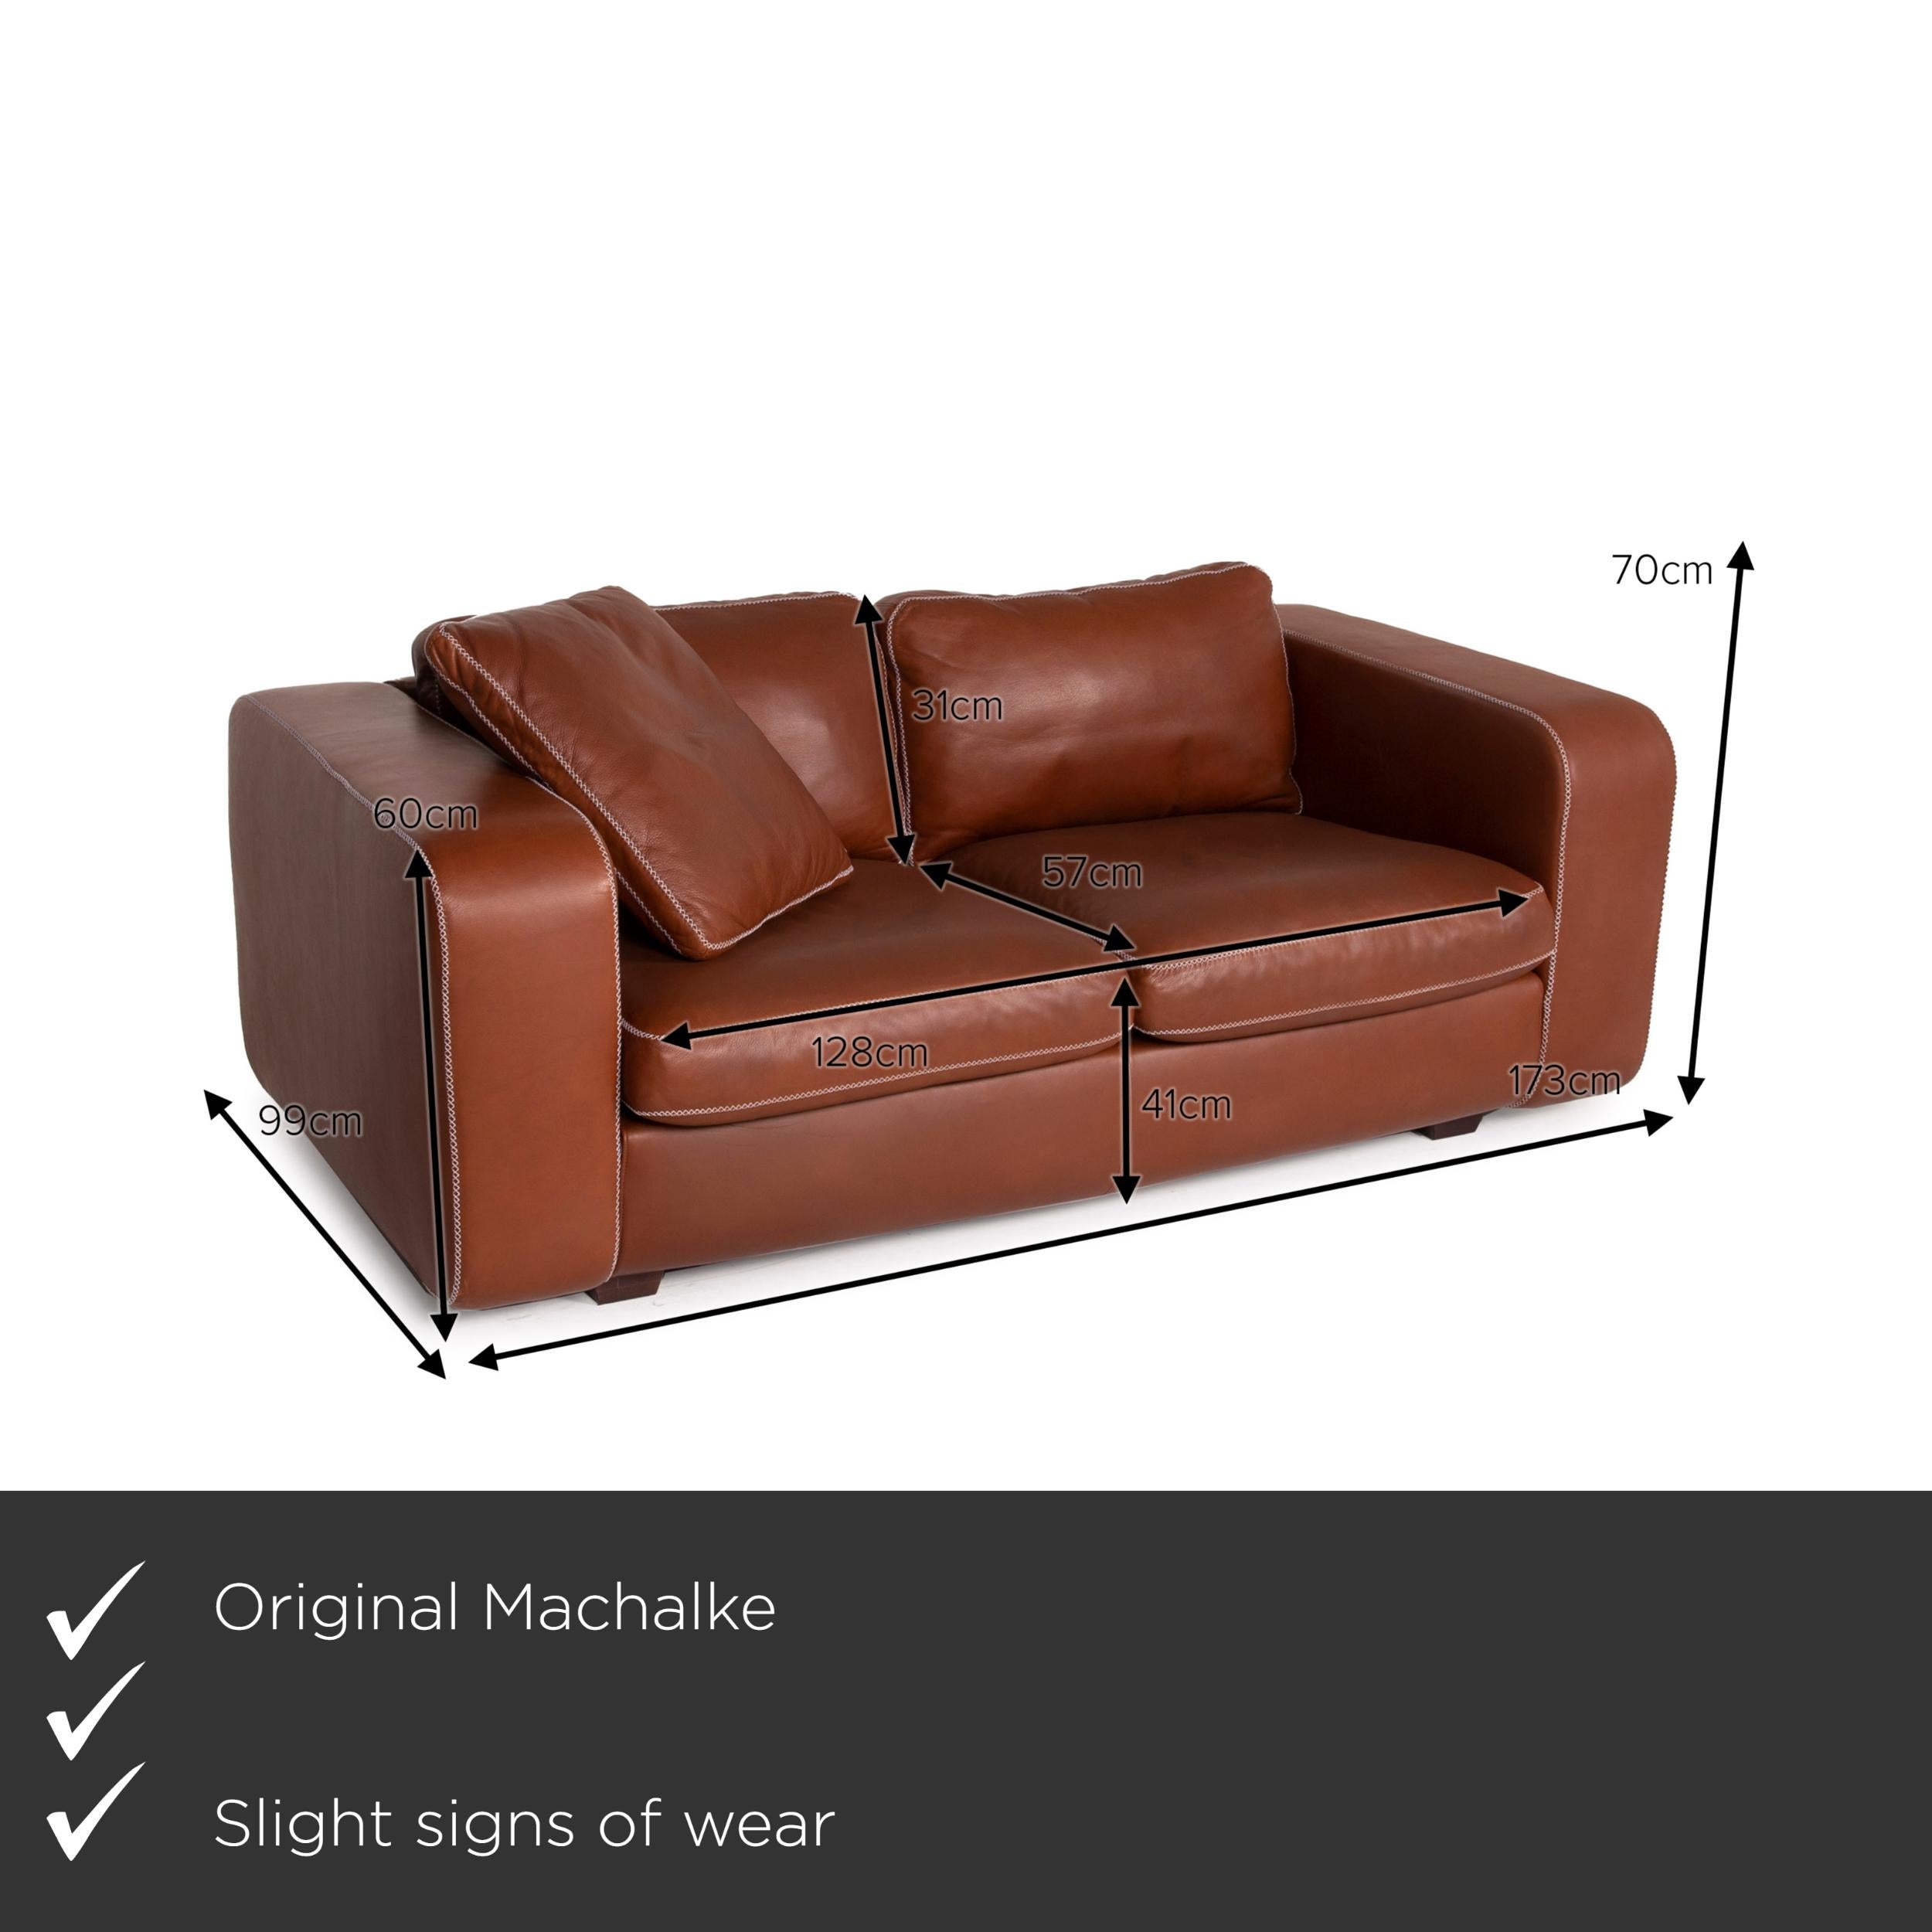 We present to you a Machalke Valentino leather sofa brown two-seater.

Product measurements in centimeters:

Depth 99
Width 173
Height 70
Seat height 41
Rest height 60
Seat depth 57
Seat width 128
Back height 31.
 
  
  